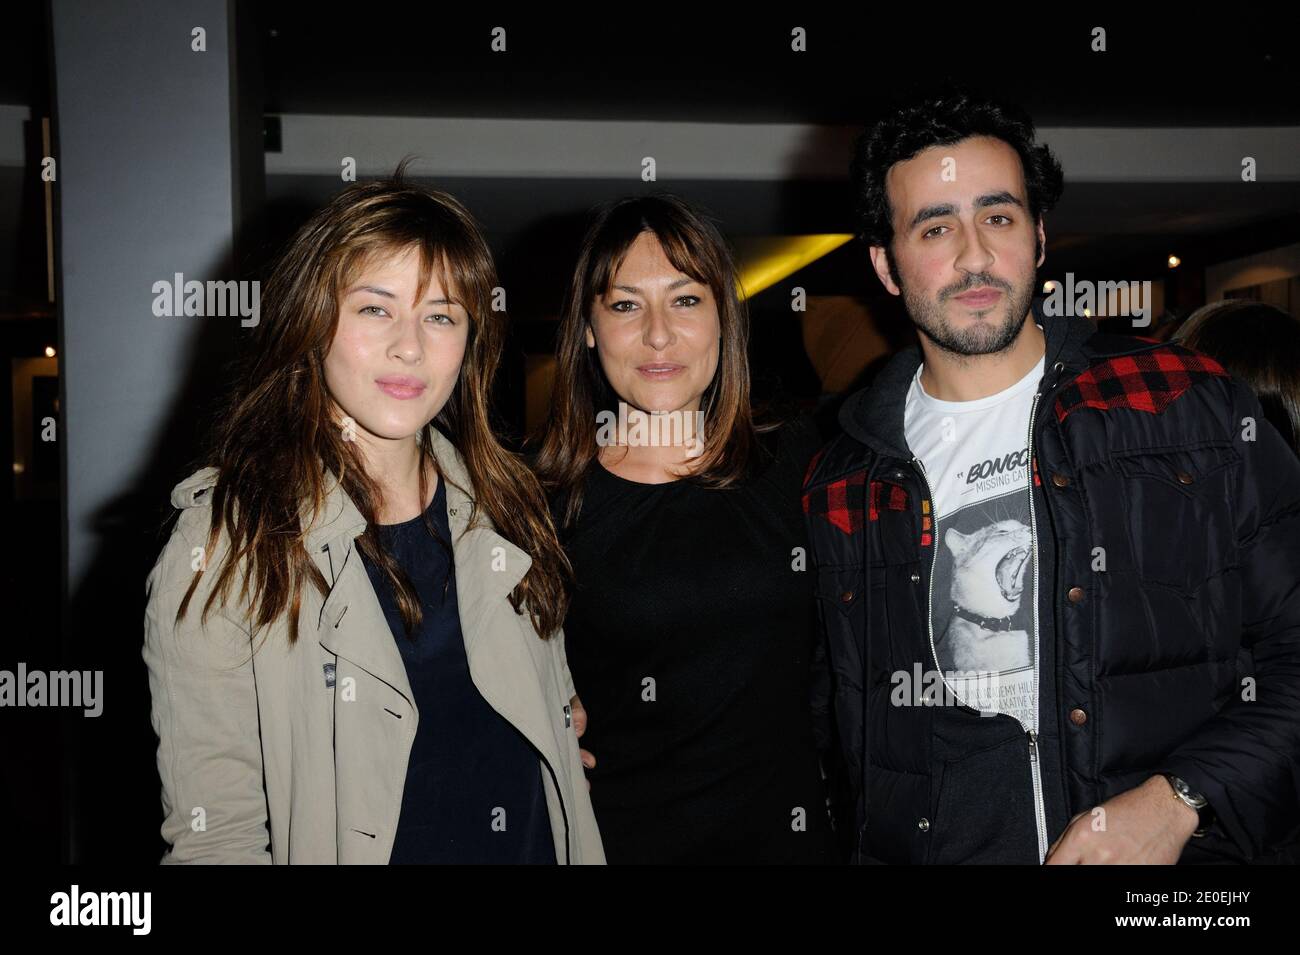 (L-R) Mylene Jampanoi, Shirley Bousquet and guest attending the premiere of 'Depression et des Potes' at UGC Les Halles theater, in Paris, France on April 26, 2012. Photo by Alban Wyters/ABACAPRESS.COM Stock Photo